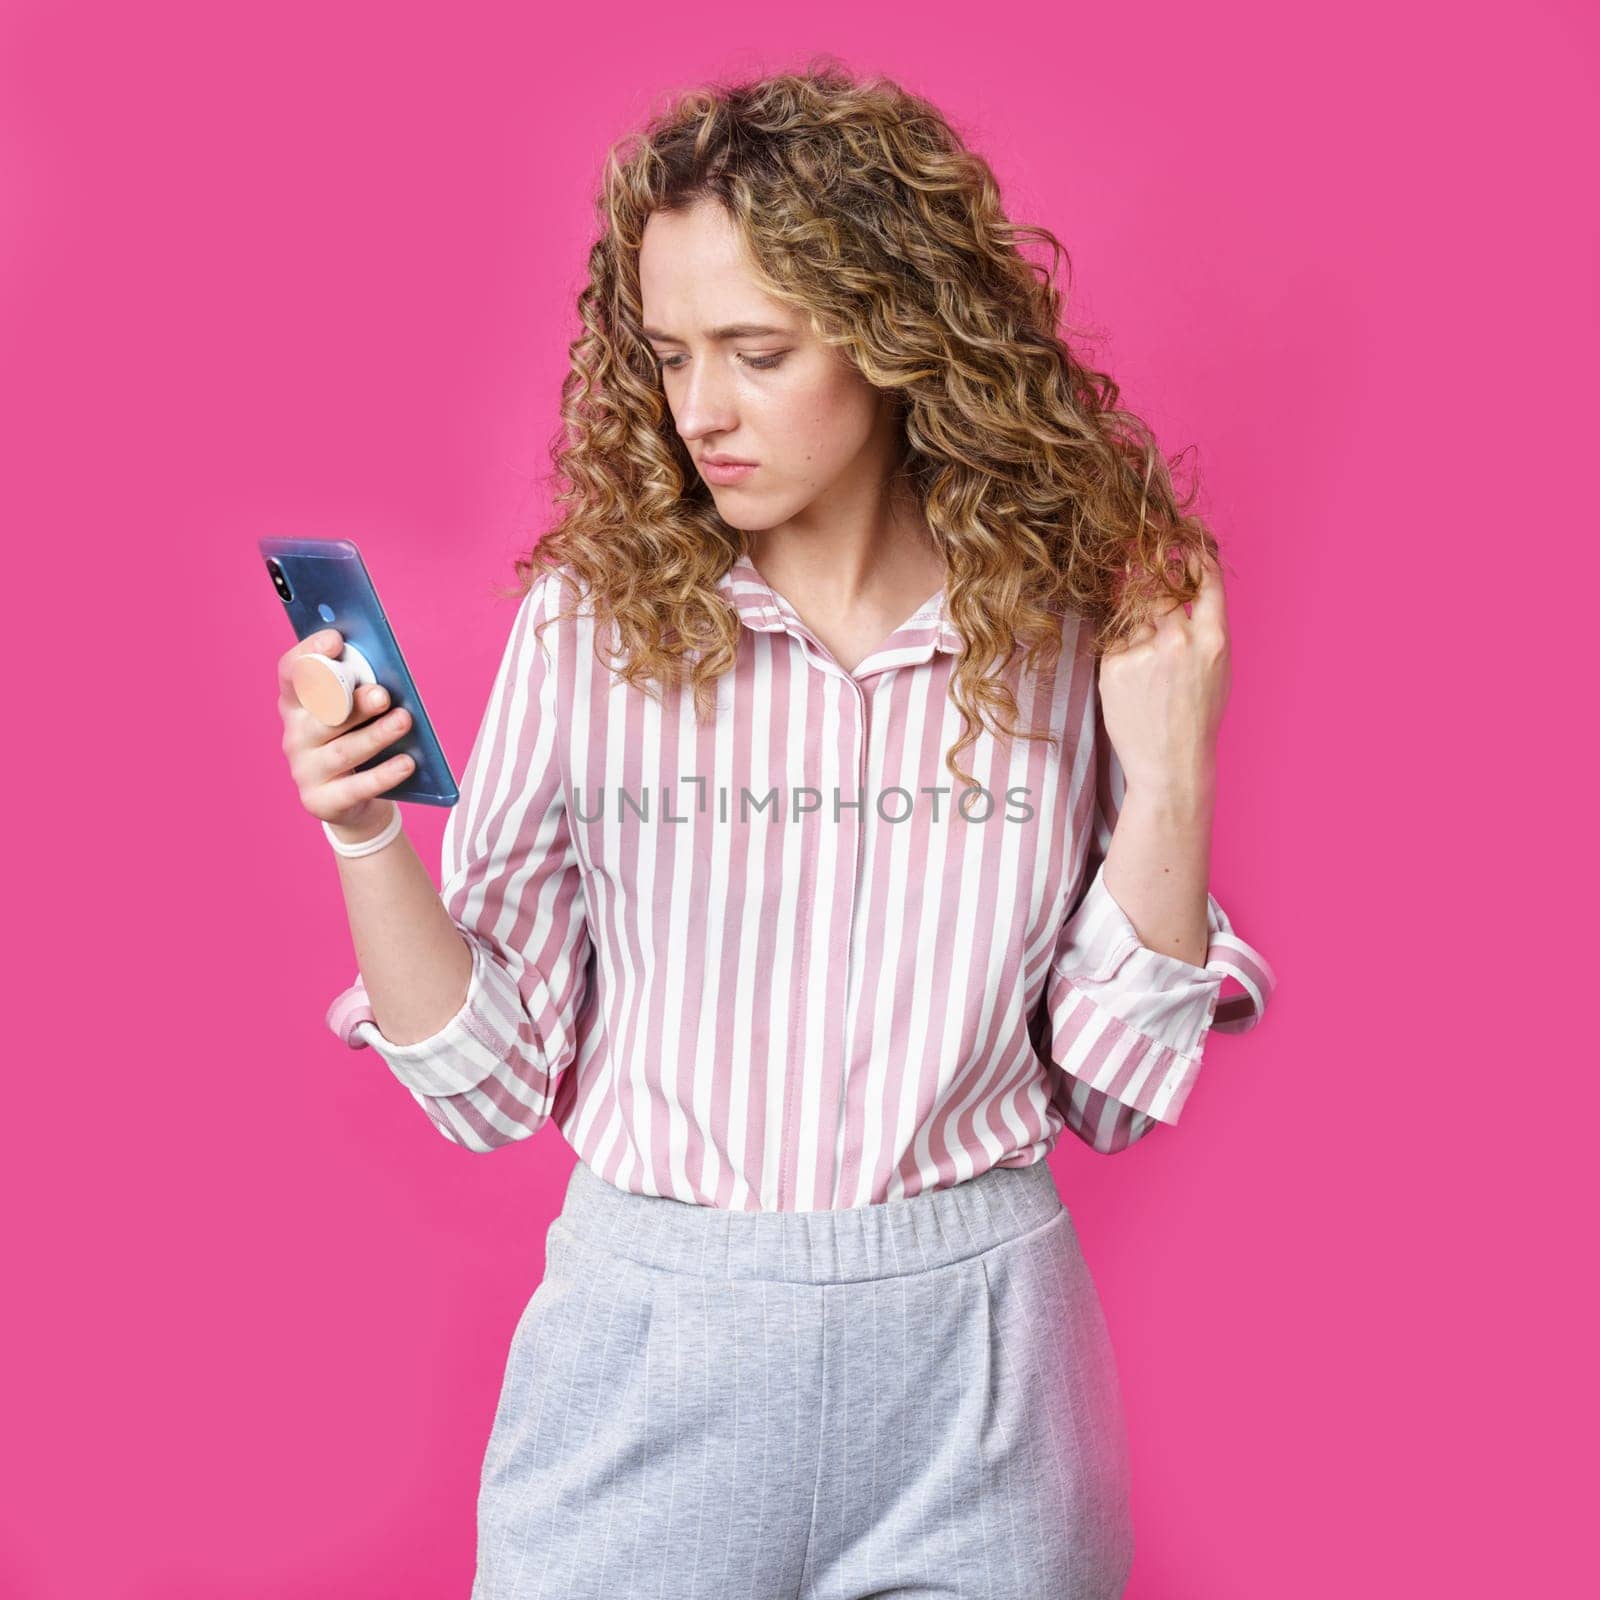 Fashionable woman in a striped shirt, reads a message on the phone. Isolated on pink background